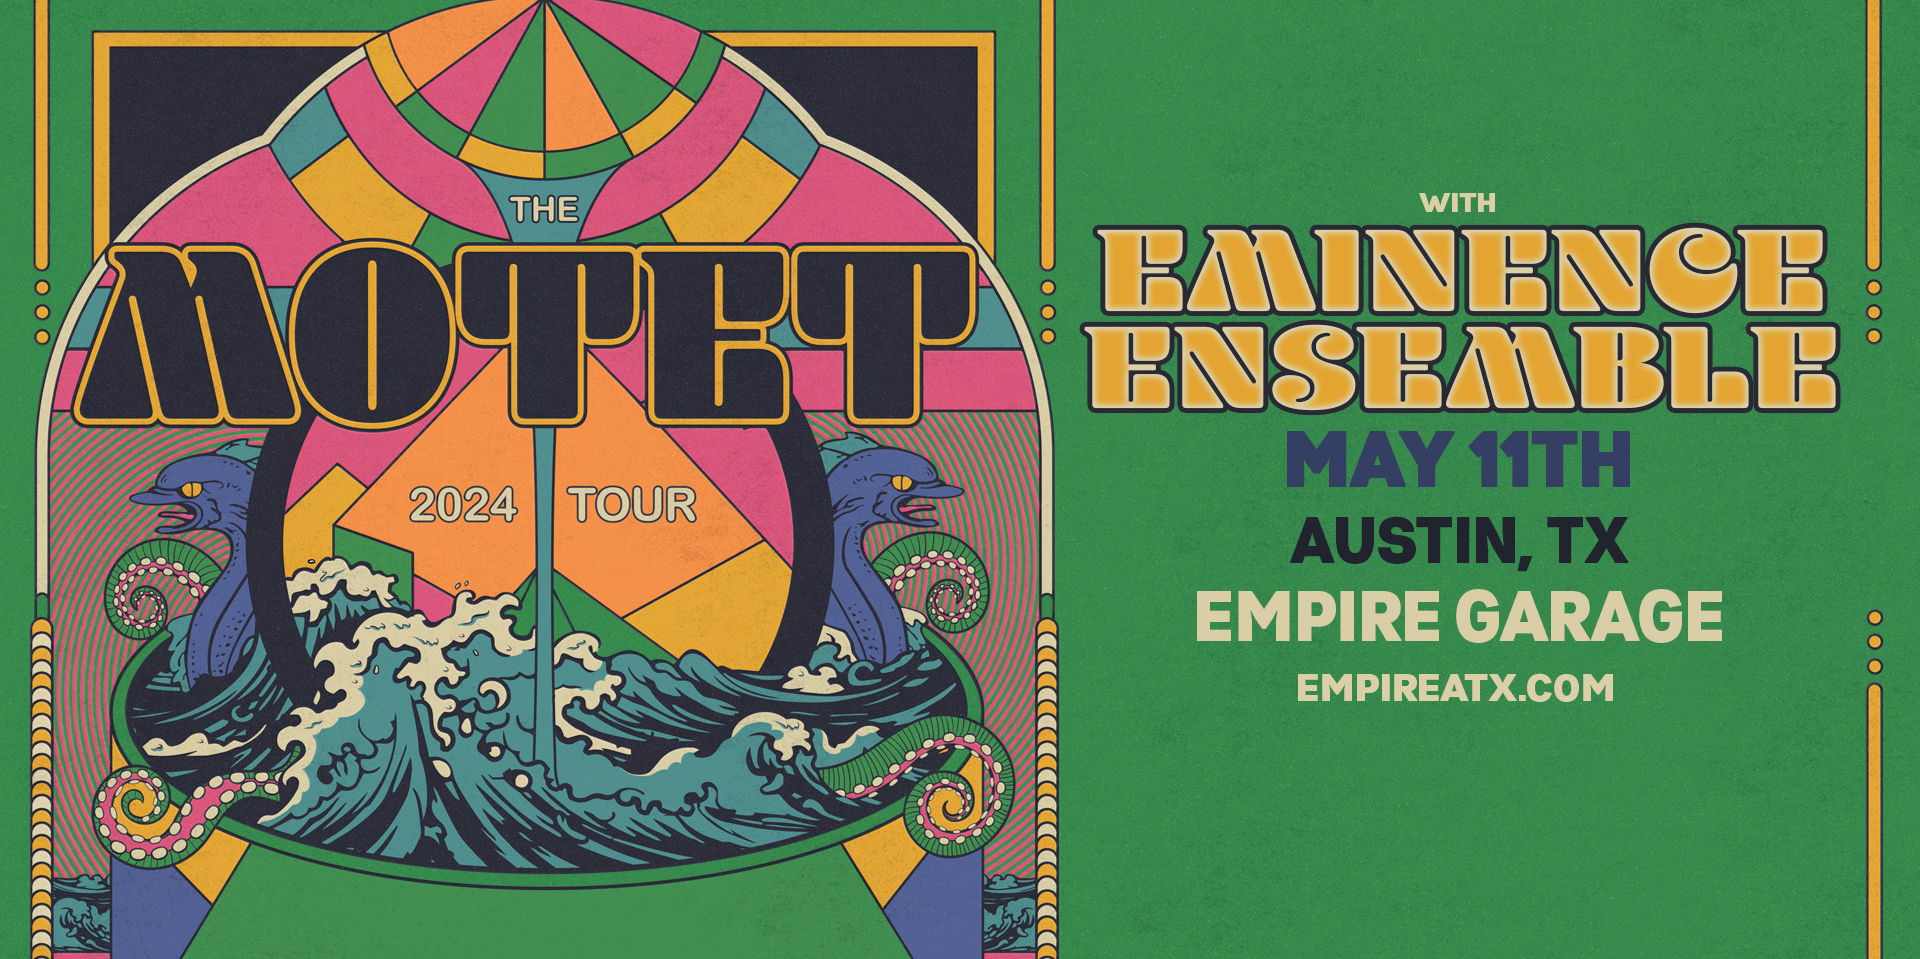 Empire Presents: The Motet w/ Eminence Ensemble at Empire Garage 5/11 promotional image